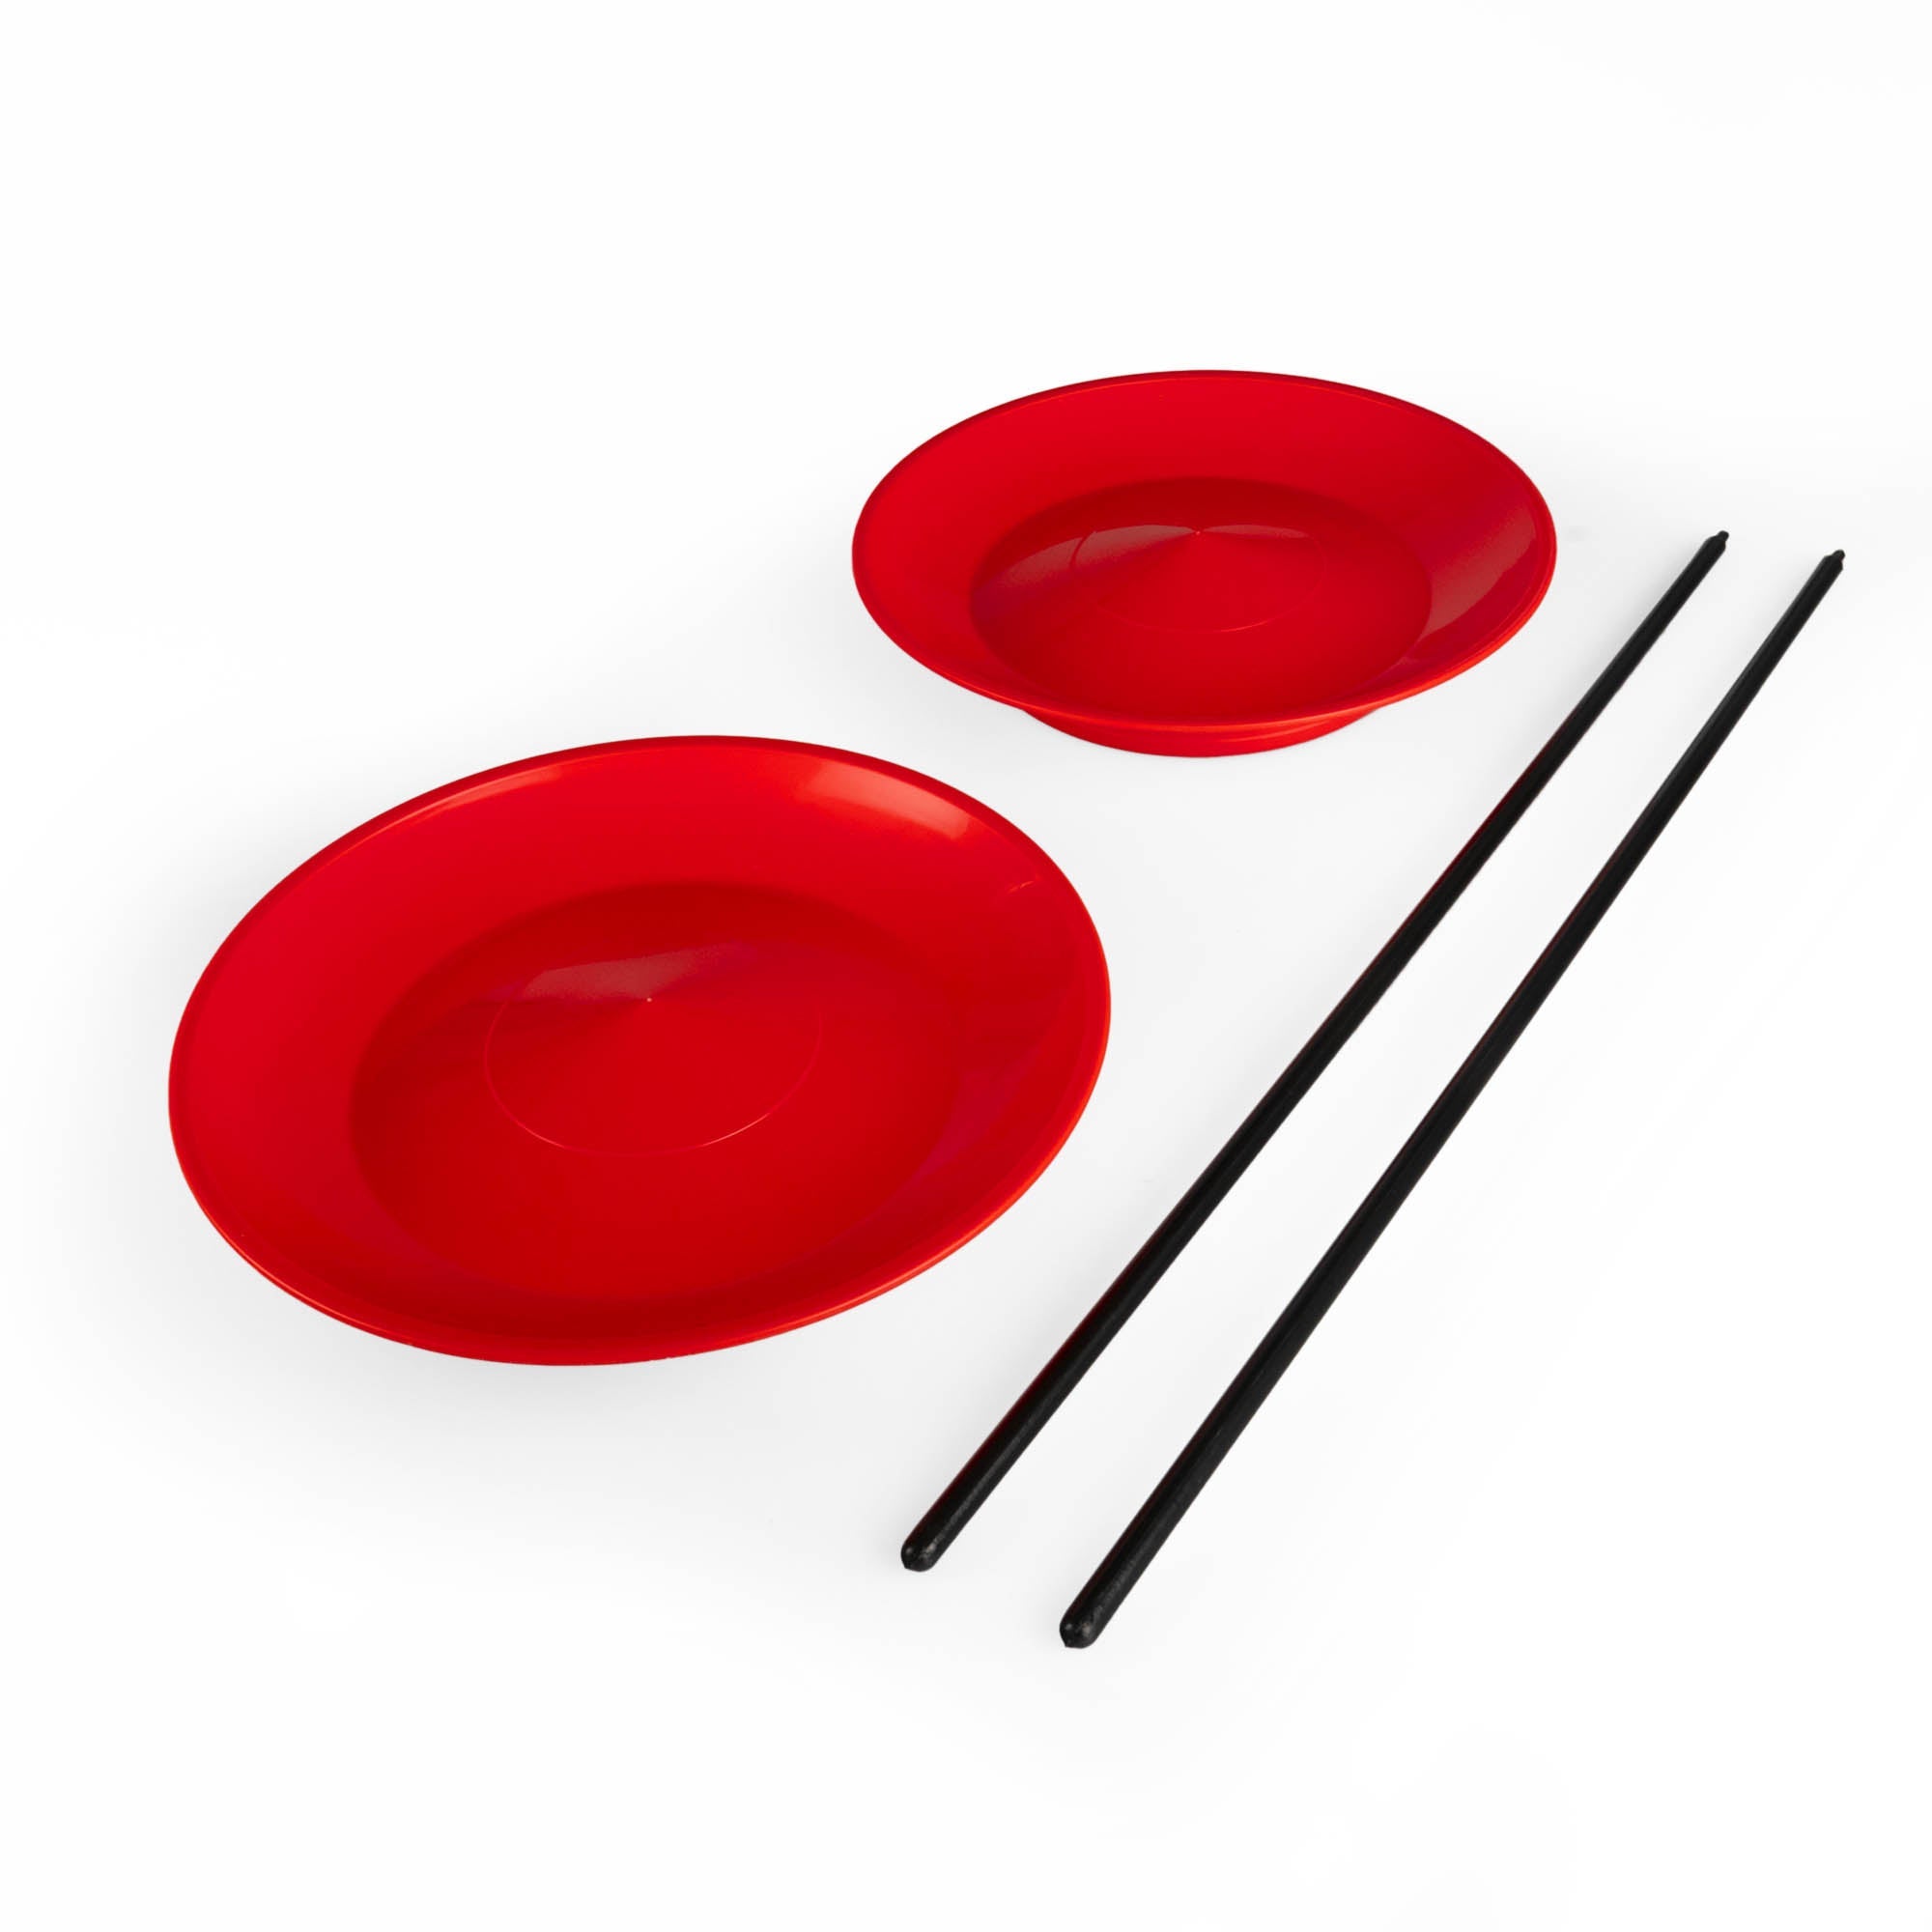 Status spinning plates 2 x red with 2 sticks at a slight angle